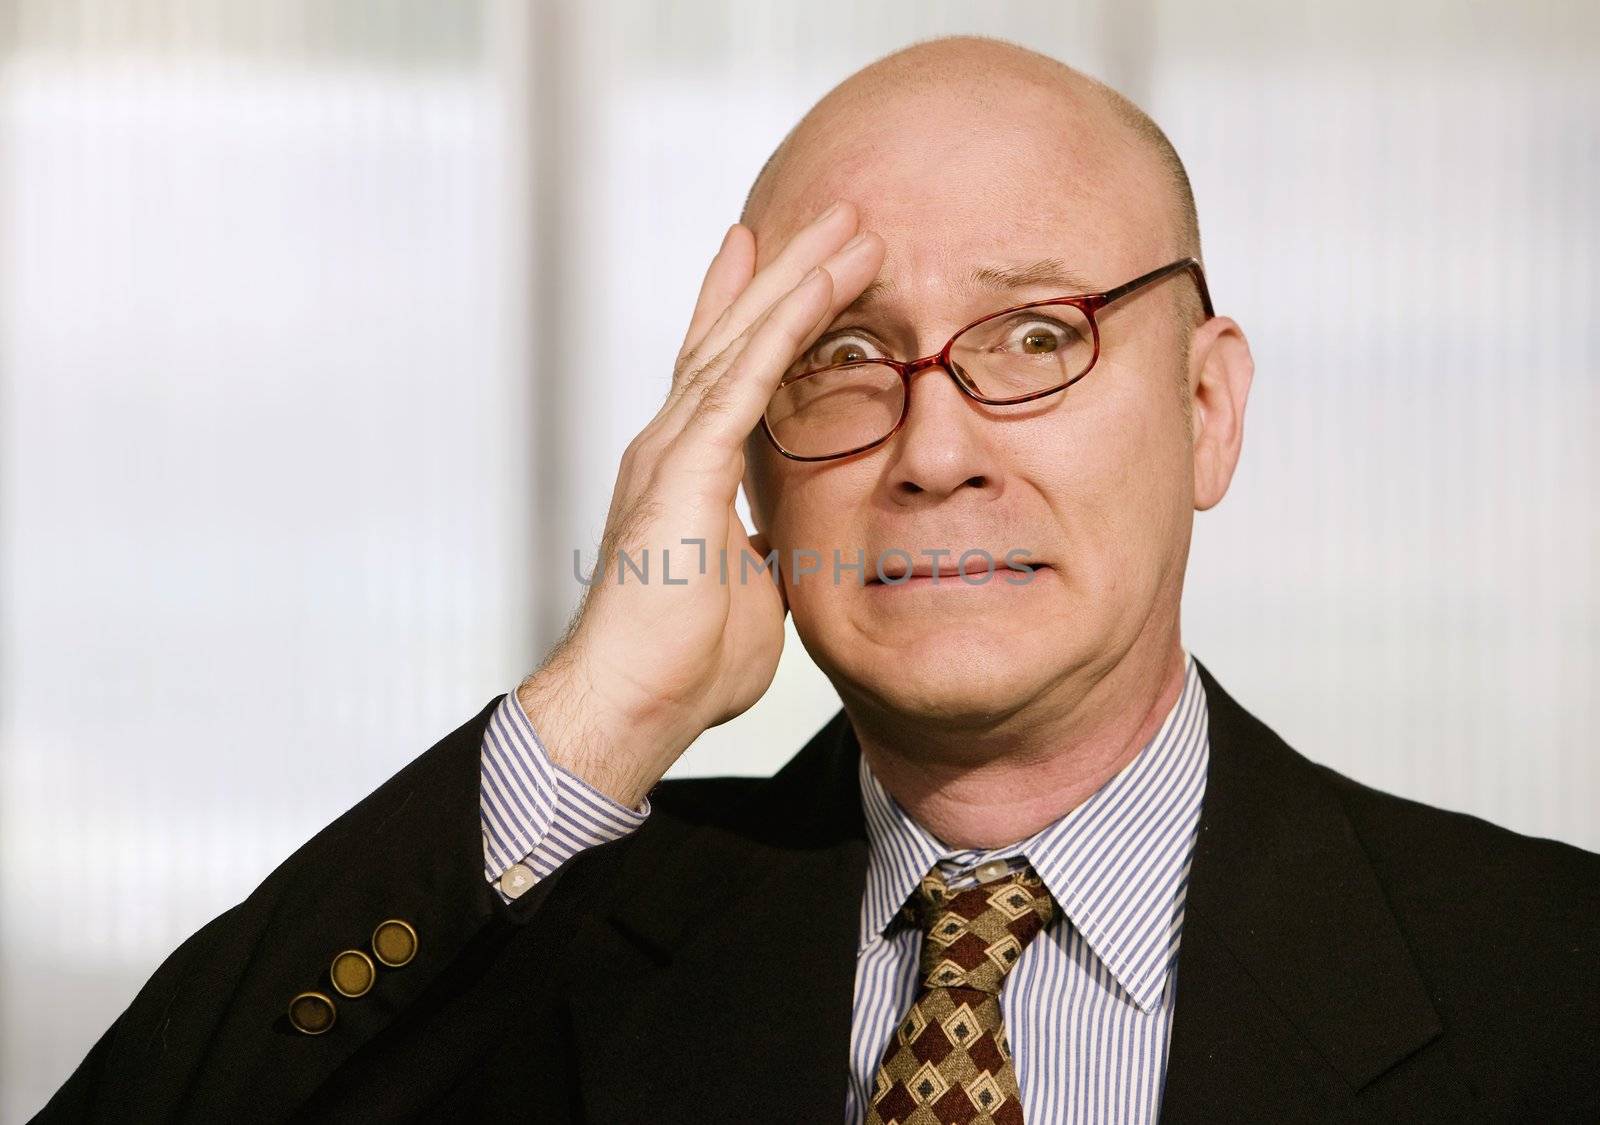 Frustrated businessman with his glasses askew and a hand to his forehead